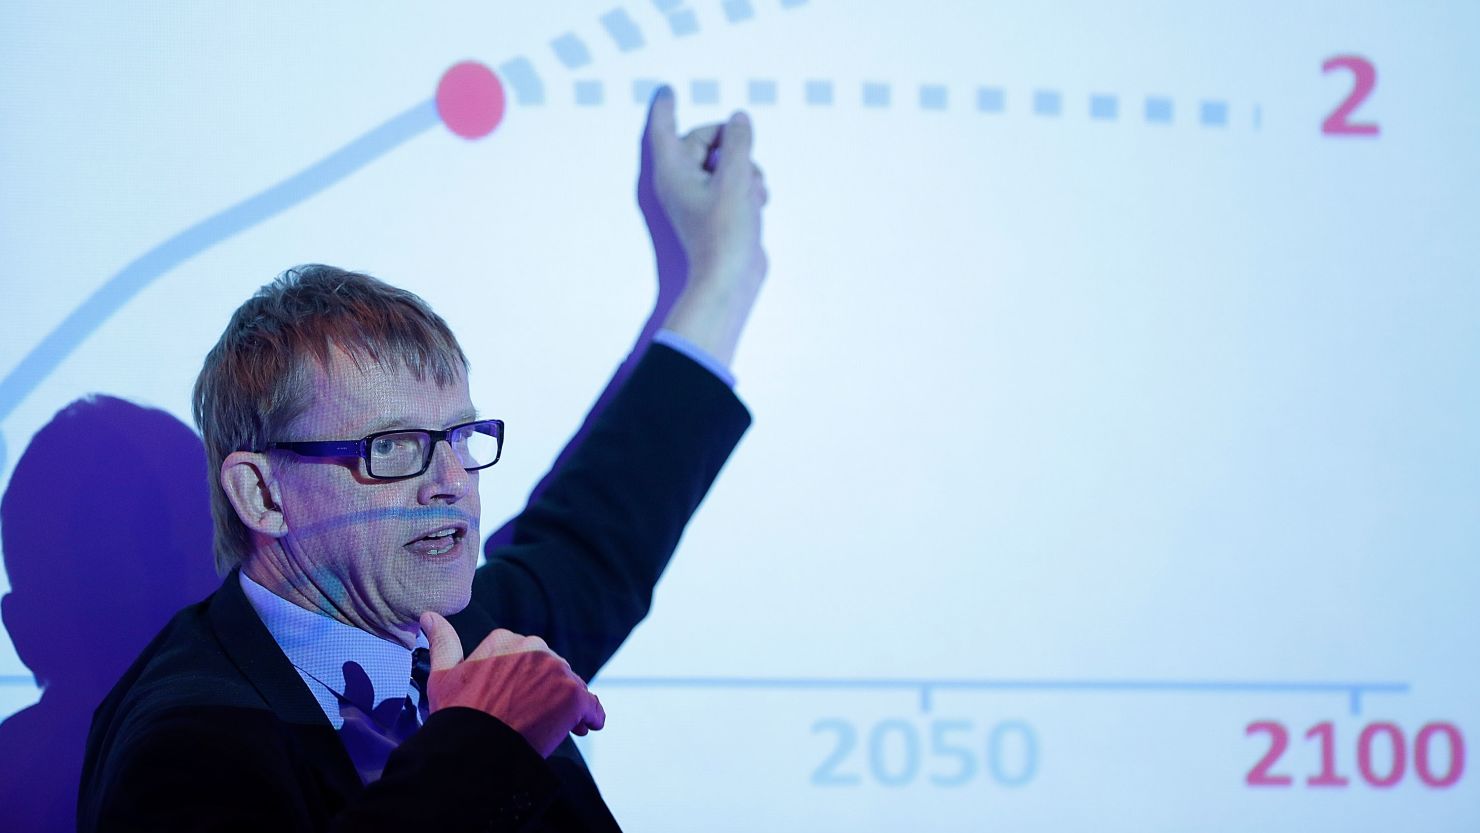 Hans Rosling says the average woman in the world now has 2.5 children and we are "entering the age of Peak Child."